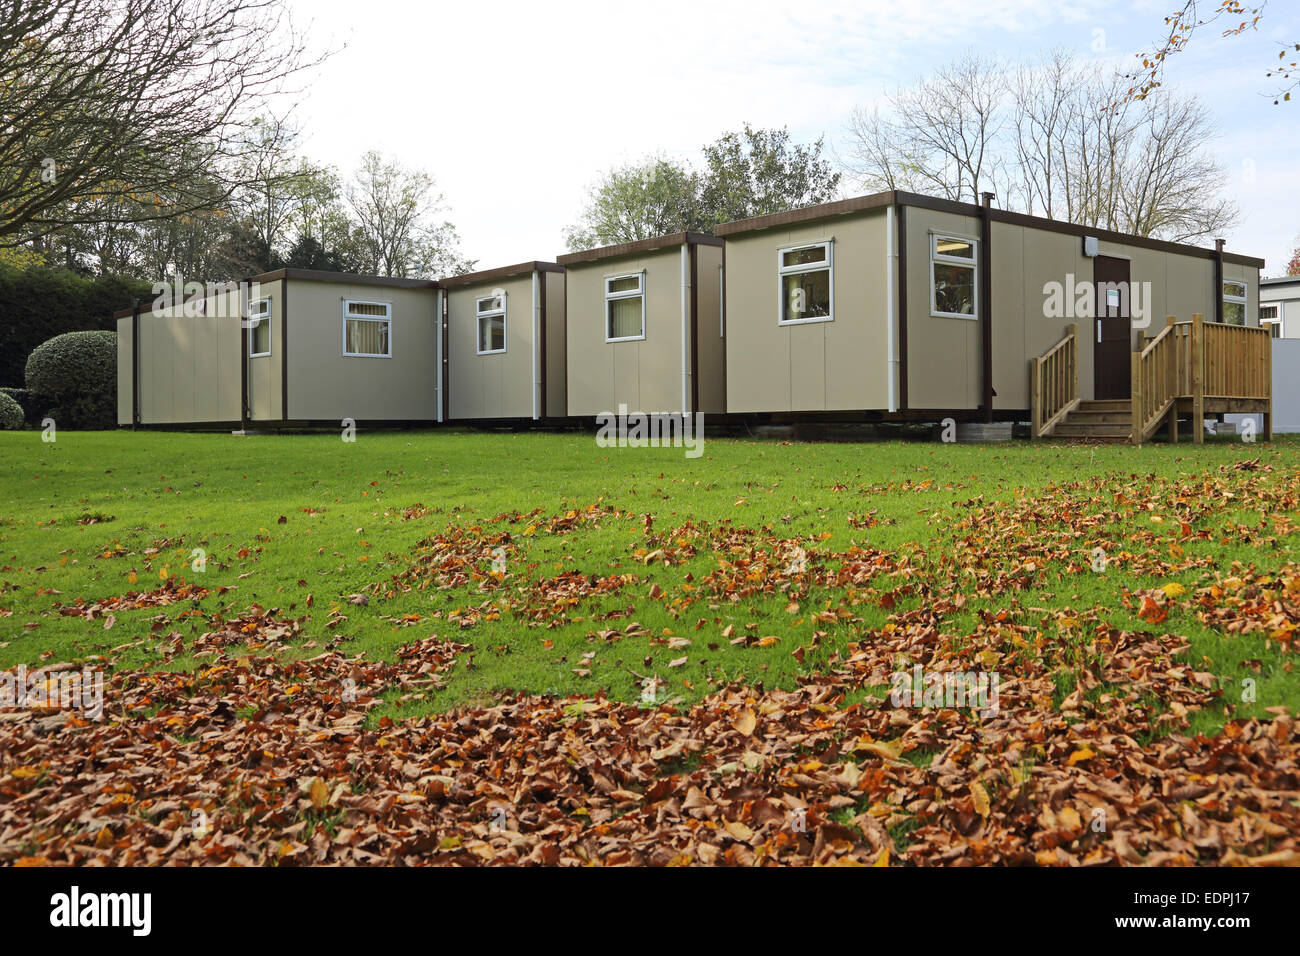 Temporary hospital outpatients accommodation constructed from modularstyle units. Stock Photo